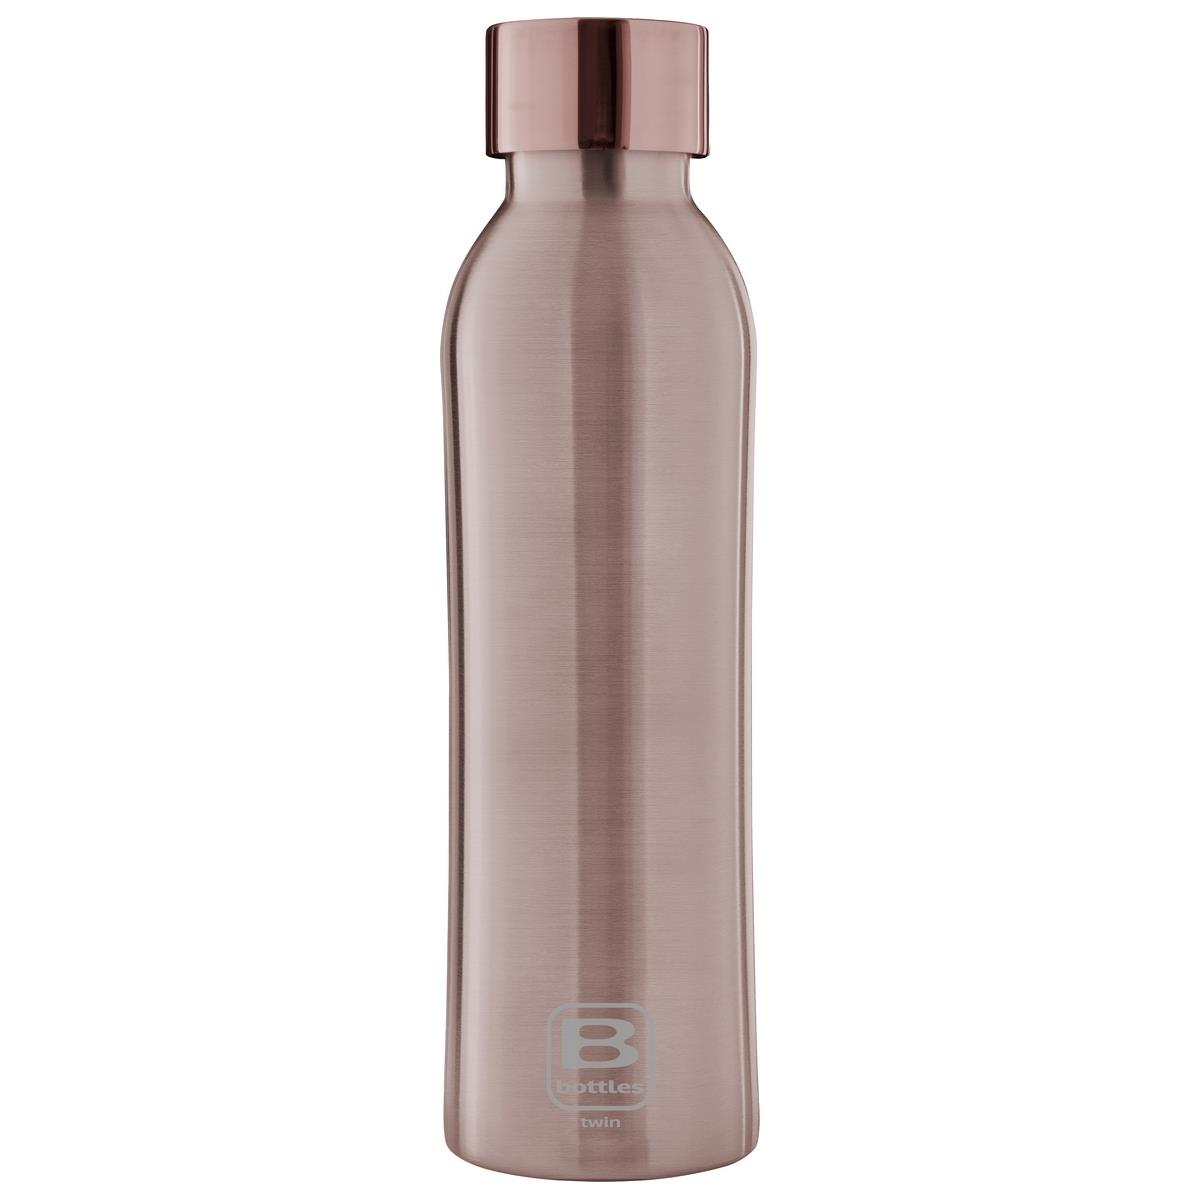 photo B Bottles Twin - Rose Gold Brushed - 500 ml - Double wall stainless steel thermal bottle. 18/10 sta